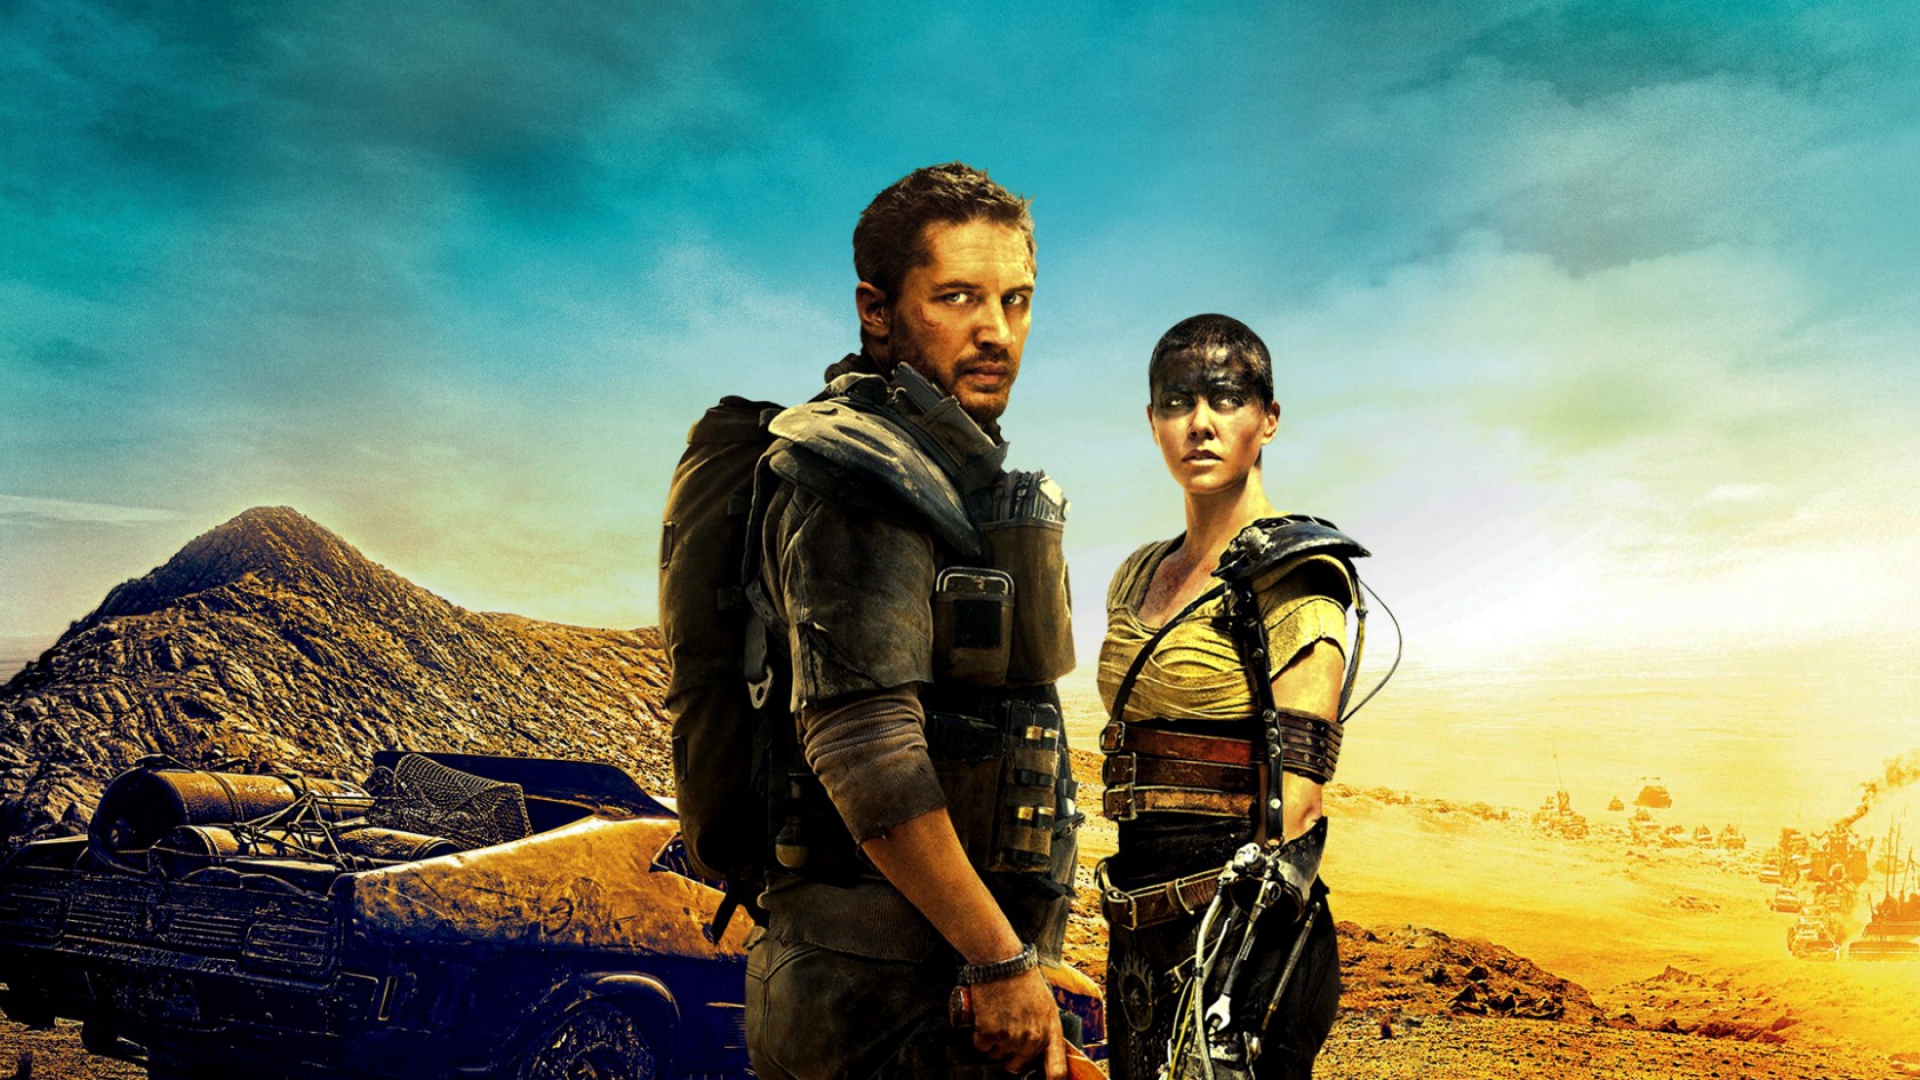  Mad max fury road Tom hardy Charlize theron Wallpaper Background